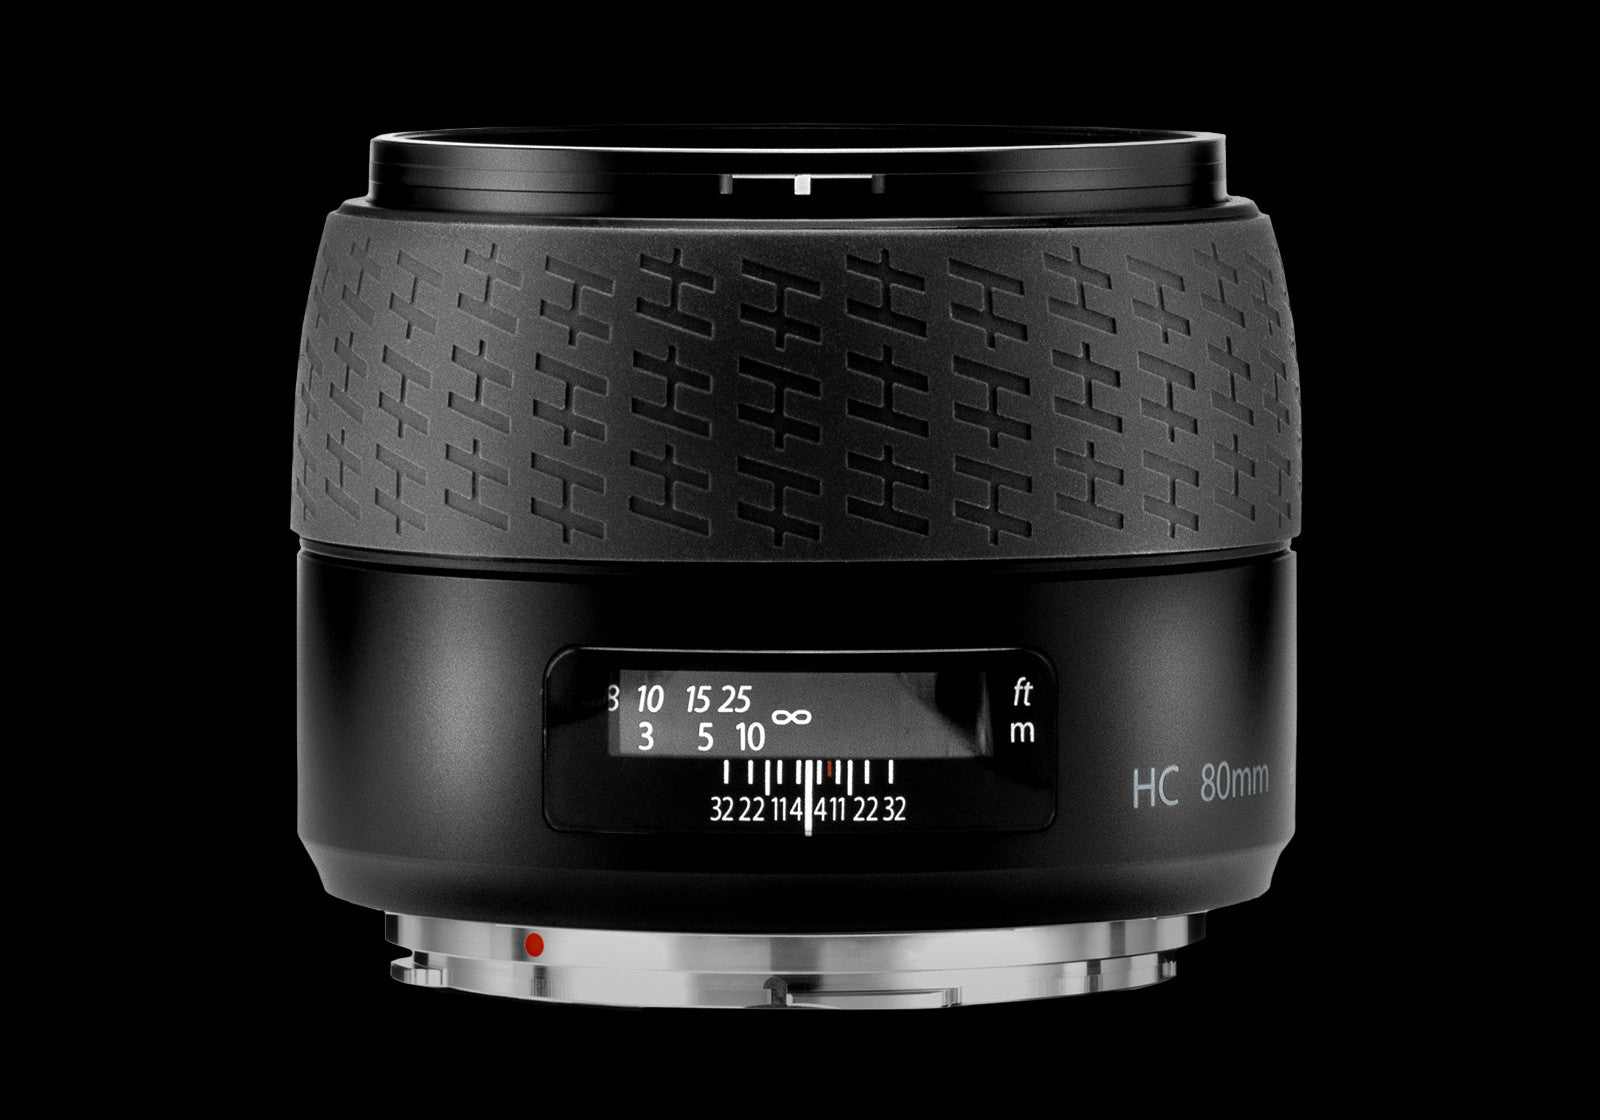 Hasselblad H5D-50c WiFi Medium Format Digital Camera with 80mm f2.8 HC AF Lens, discontinued, Hasselblad - Pictureline  - 2